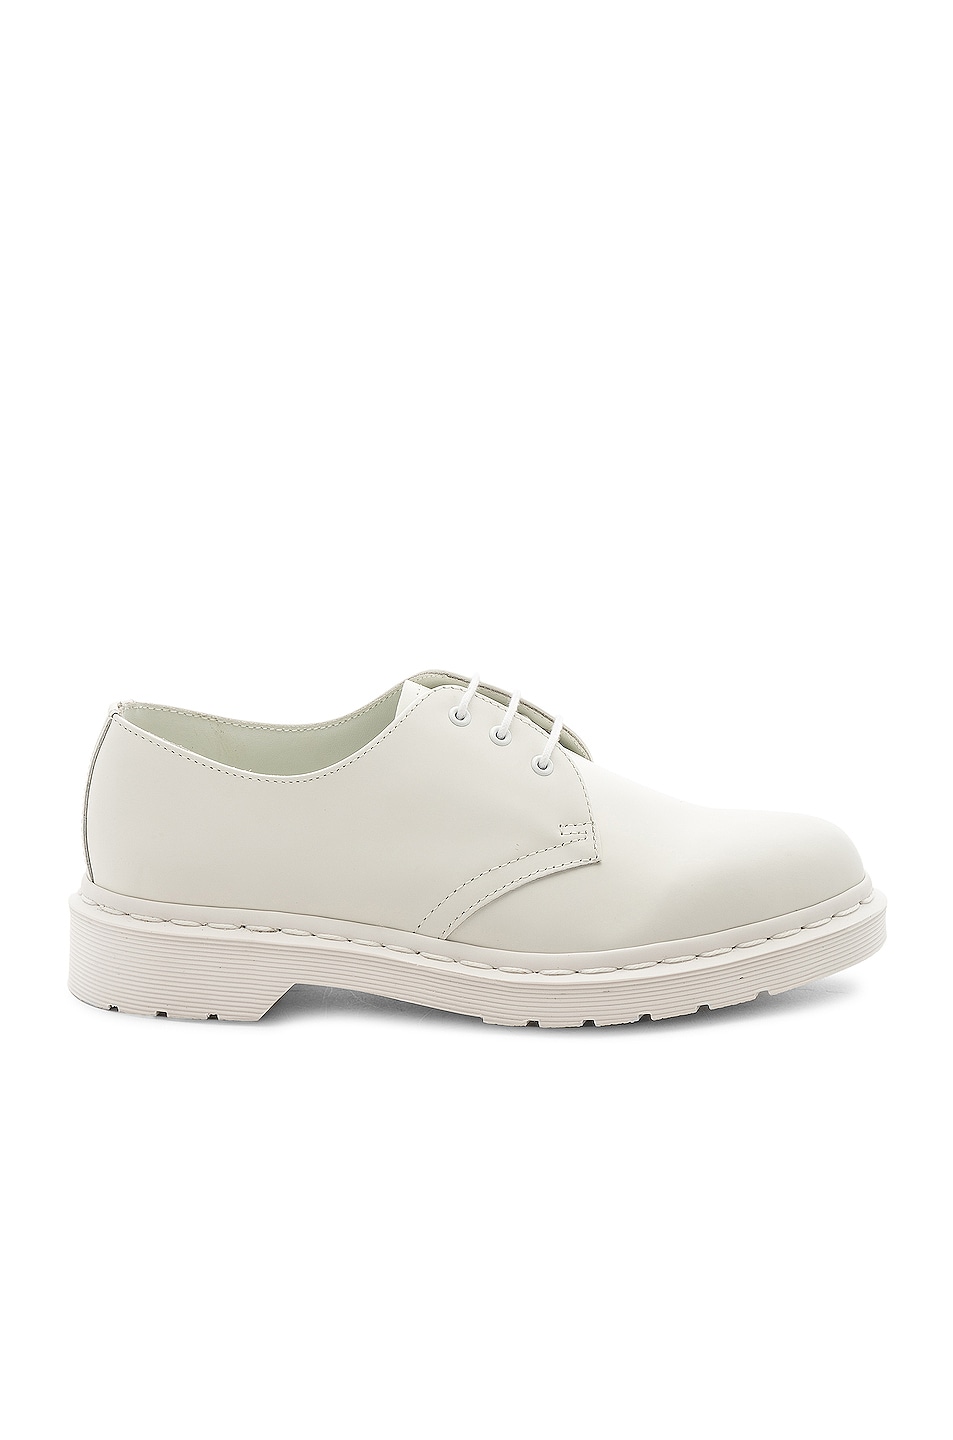 Image 1 of Dr. Martens 1461 Mono Shoe in White